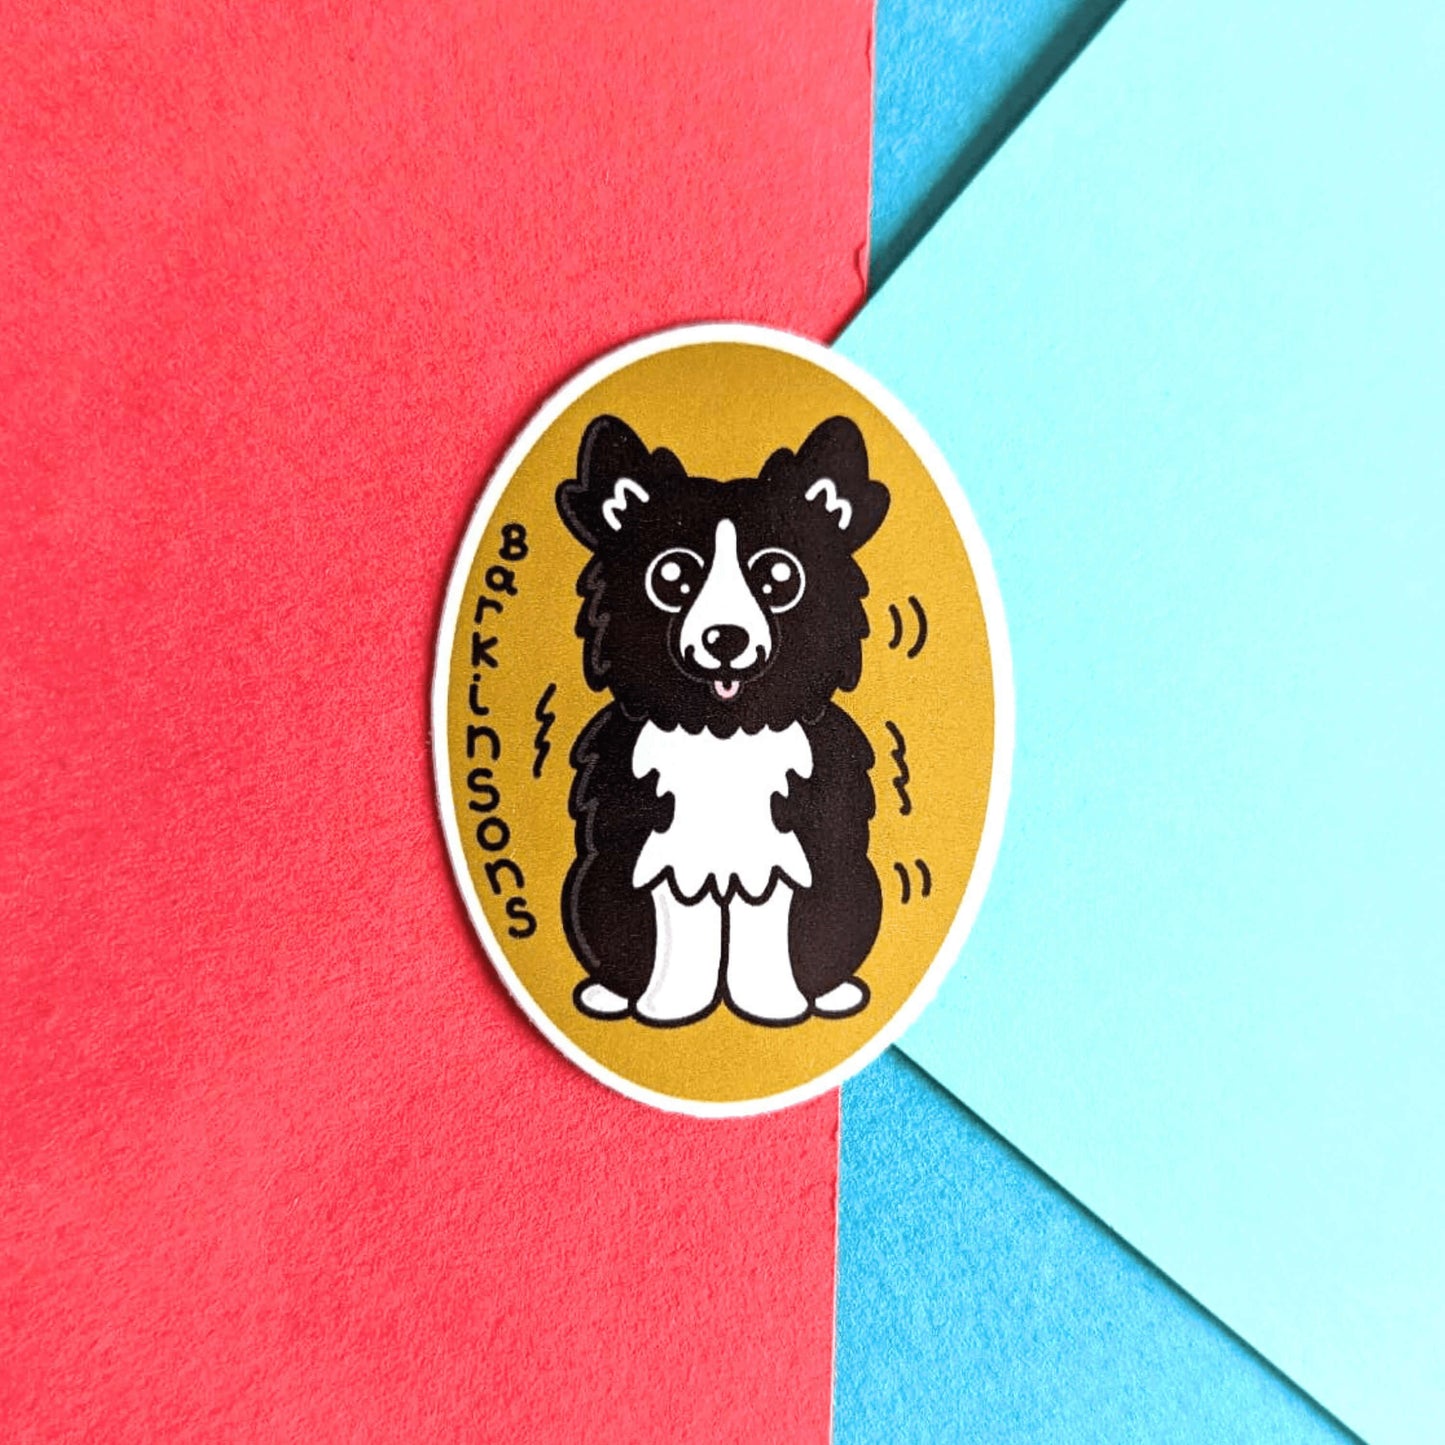 Barkinsons Disease Sticker - Parkinsons on a red, blue and green background. The sticker is yellow and oval shaped with a black and white fluffy dog in the middle sat down with big sparkly eyes and pink tongue hanging out. There are black squiggles around the dog and 'Barkinsons' written in black vertical letters. The design is to raise awareness for parkinson's disease.